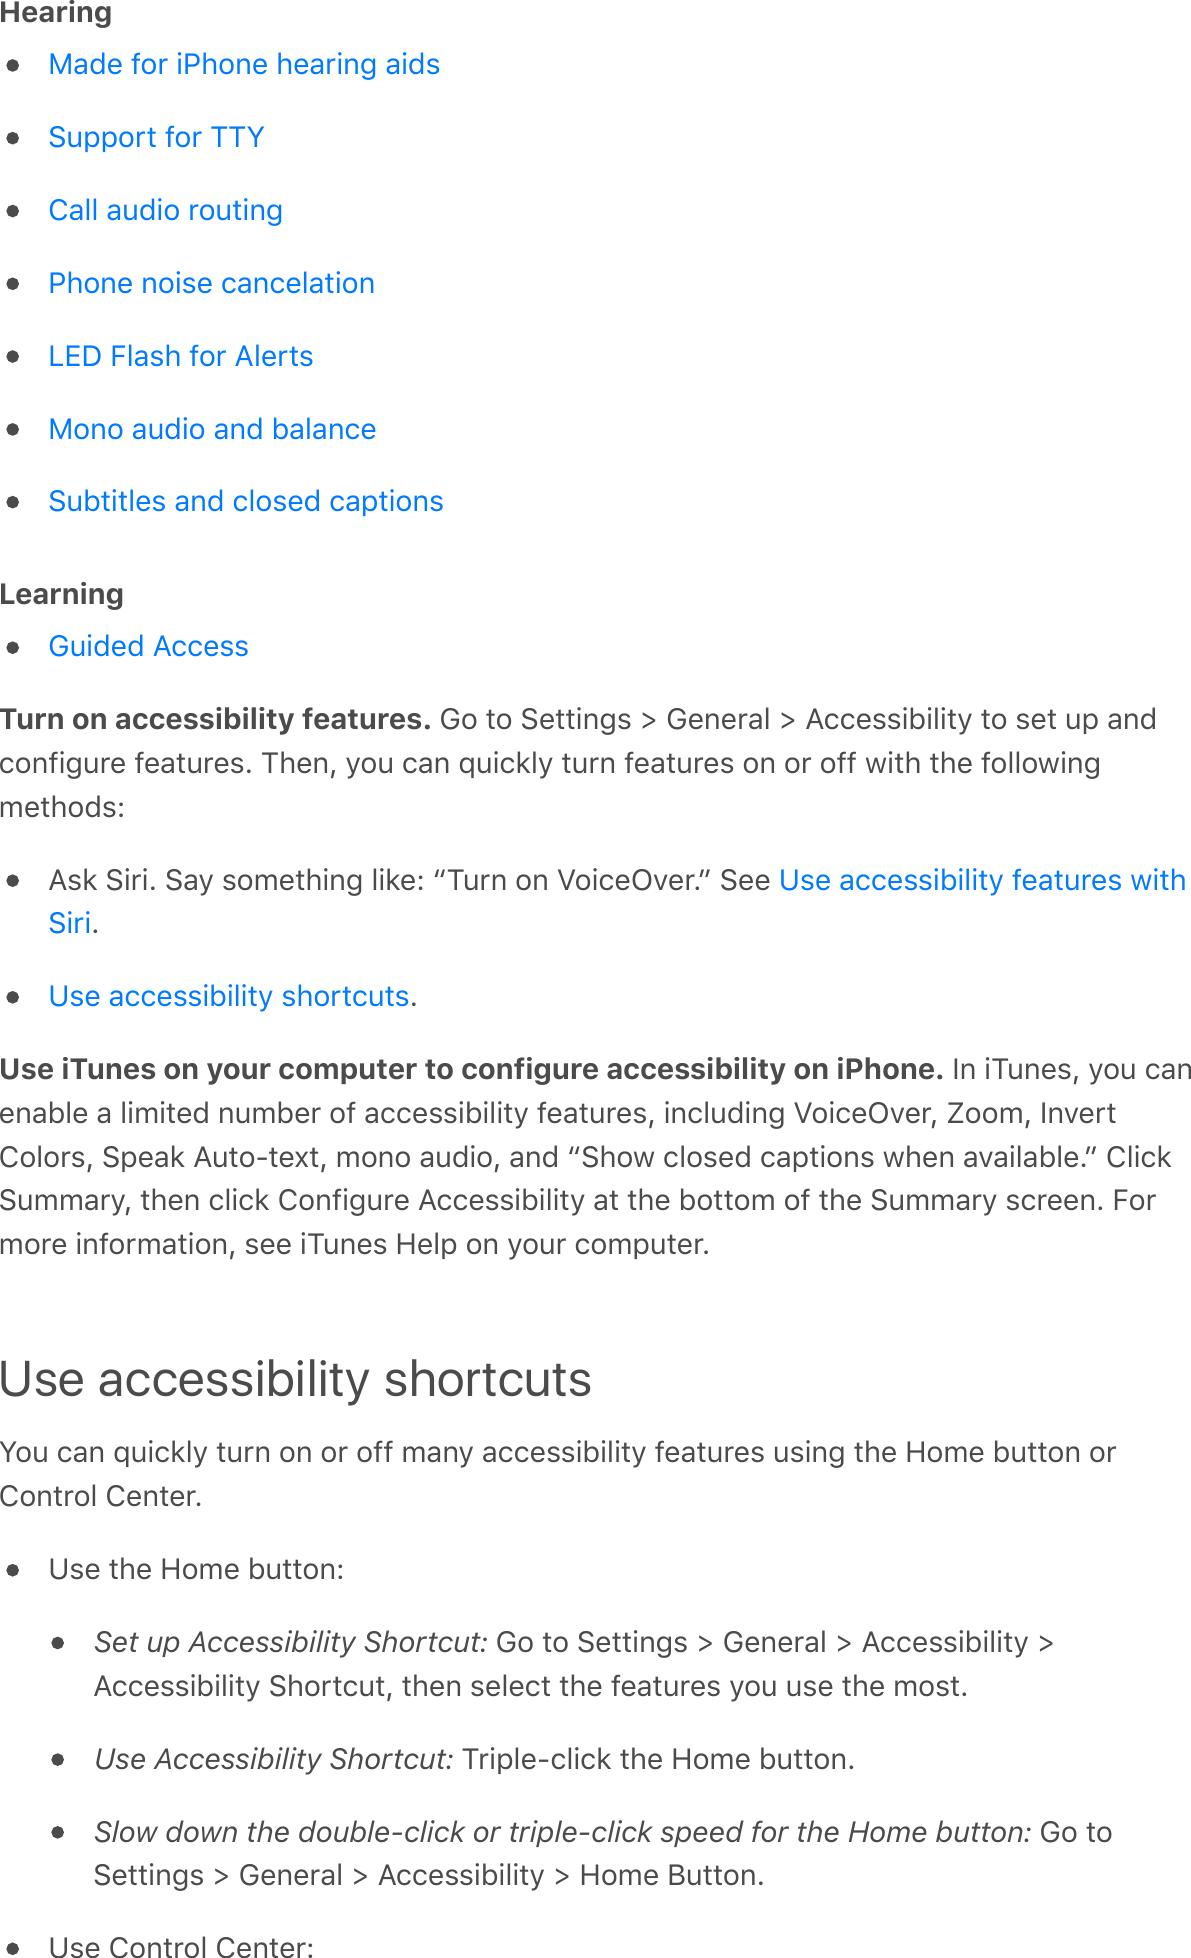 HearingLearningTurn on accessibility features. G&quot;&amp;%&quot;&amp;E.%%(#5)&amp;d&amp;G.#.,-?&amp;d&amp;;99.))(@(?(%/&amp;%&quot;&amp;).%&amp;06&amp;-#&lt;9&quot;#8(50,.&amp;8.-%0,.)A&amp;21.#L&amp;/&quot;0&amp;9-#&amp;c0(93?/&amp;%0,#&amp;8.-%0,.)&amp;&quot;#&amp;&quot;,&amp;&quot;88&amp;H(%1&amp;%1.&amp;8&quot;??&quot;H(#5&apos;.%1&quot;&lt;)M;)3&amp;E(,(A&amp;E-/&amp;)&quot;&apos;.%1(#5&amp;?(3.M&amp;a20,#&amp;&quot;#&amp;S&quot;(9.I:.,Ab&amp;E..&amp;AAUse iTunes on your computer to configure accessibility on iPhone. Q#&amp;(20#.)L&amp;/&quot;0&amp;9-#.#-@?.&amp;-&amp;?(&apos;(%.&lt;&amp;#0&apos;@.,&amp;&quot;8&amp;-99.))(@(?(%/&amp;8.-%0,.)L&amp;(#9?0&lt;(#5&amp;S&quot;(9.I:.,L&amp;r&quot;&quot;&apos;L&amp;Q#:.,%O&quot;?&quot;,)L&amp;E6.-3&amp;;0%&quot;T%.`%L&amp;&apos;&quot;#&quot;&amp;-0&lt;(&quot;L&amp;-#&lt;&amp;aE1&quot;H&amp;9?&quot;).&lt;&amp;9-6%(&quot;#)&amp;H1.#&amp;-:-(?-@?.Ab&amp;O?(93E0&apos;&apos;-,/L&amp;%1.#&amp;9?(93&amp;O&quot;#8(50,.&amp;;99.))(@(?(%/&amp;-%&amp;%1.&amp;@&quot;%%&quot;&apos;&amp;&quot;8&amp;%1.&amp;E0&apos;&apos;-,/&amp;)9,..#A&amp;+&quot;,&apos;&quot;,.&amp;(#8&quot;,&apos;-%(&quot;#L&amp;)..&amp;(20#.)&amp;P.?6&amp;&quot;#&amp;/&quot;0,&amp;9&quot;&apos;60%.,AUse accessibility shortcutsN&quot;0&amp;9-#&amp;c0(93?/&amp;%0,#&amp;&quot;#&amp;&quot;,&amp;&quot;88&amp;&apos;-#/&amp;-99.))(@(?(%/&amp;8.-%0,.)&amp;0)(#5&amp;%1.&amp;P&quot;&apos;.&amp;@0%%&quot;#&amp;&quot;,O&quot;#%,&quot;?&amp;O.#%.,A\).&amp;%1.&amp;P&quot;&apos;.&amp;@0%%&quot;#MSet up Accessibility Shortcut:&amp;G&quot;&amp;%&quot;&amp;E.%%(#5)&amp;d&amp;G.#.,-?&amp;d&amp;;99.))(@(?(%/&amp;d;99.))(@(?(%/&amp;E1&quot;,%90%L&amp;%1.#&amp;).?.9%&amp;%1.&amp;8.-%0,.)&amp;/&quot;0&amp;0).&amp;%1.&amp;&apos;&quot;)%AUse Accessibility Shortcut:&amp;2,(6?.T9?(93&amp;%1.&amp;P&quot;&apos;.&amp;@0%%&quot;#ASlow down the double-click or triple-click speed for the Home button:&amp;G&quot;&amp;%&quot;E.%%(#5)&amp;d&amp;G.#.,-?&amp;d&amp;;99.))(@(?(%/&amp;d&amp;P&quot;&apos;.&amp;K0%%&quot;#A\).&amp;O&quot;#%,&quot;?&amp;O.#%.,MB-&lt;.&amp;8&quot;,&amp;(71&quot;#.&amp;1.-,(#5&amp;-(&lt;)E066&quot;,%&amp;8&quot;,&amp;22NO-??&amp;-0&lt;(&quot;&amp;,&quot;0%(#571&quot;#.&amp;#&quot;().&amp;9-#9.?-%(&quot;#=V!&amp;+?-)1&amp;8&quot;,&amp;;?.,%)B&quot;#&quot;&amp;-0&lt;(&quot;&amp;-#&lt;&amp;@-?-#9.E0@%(%?.)&amp;-#&lt;&amp;9?&quot;).&lt;&amp;9-6%(&quot;#)G0(&lt;.&lt;&amp;;99.))\).&amp;-99.))(@(?(%/&amp;8.-%0,.)&amp;H(%1E(,(\).&amp;-99.))(@(?(%/&amp;)1&quot;,%90%)